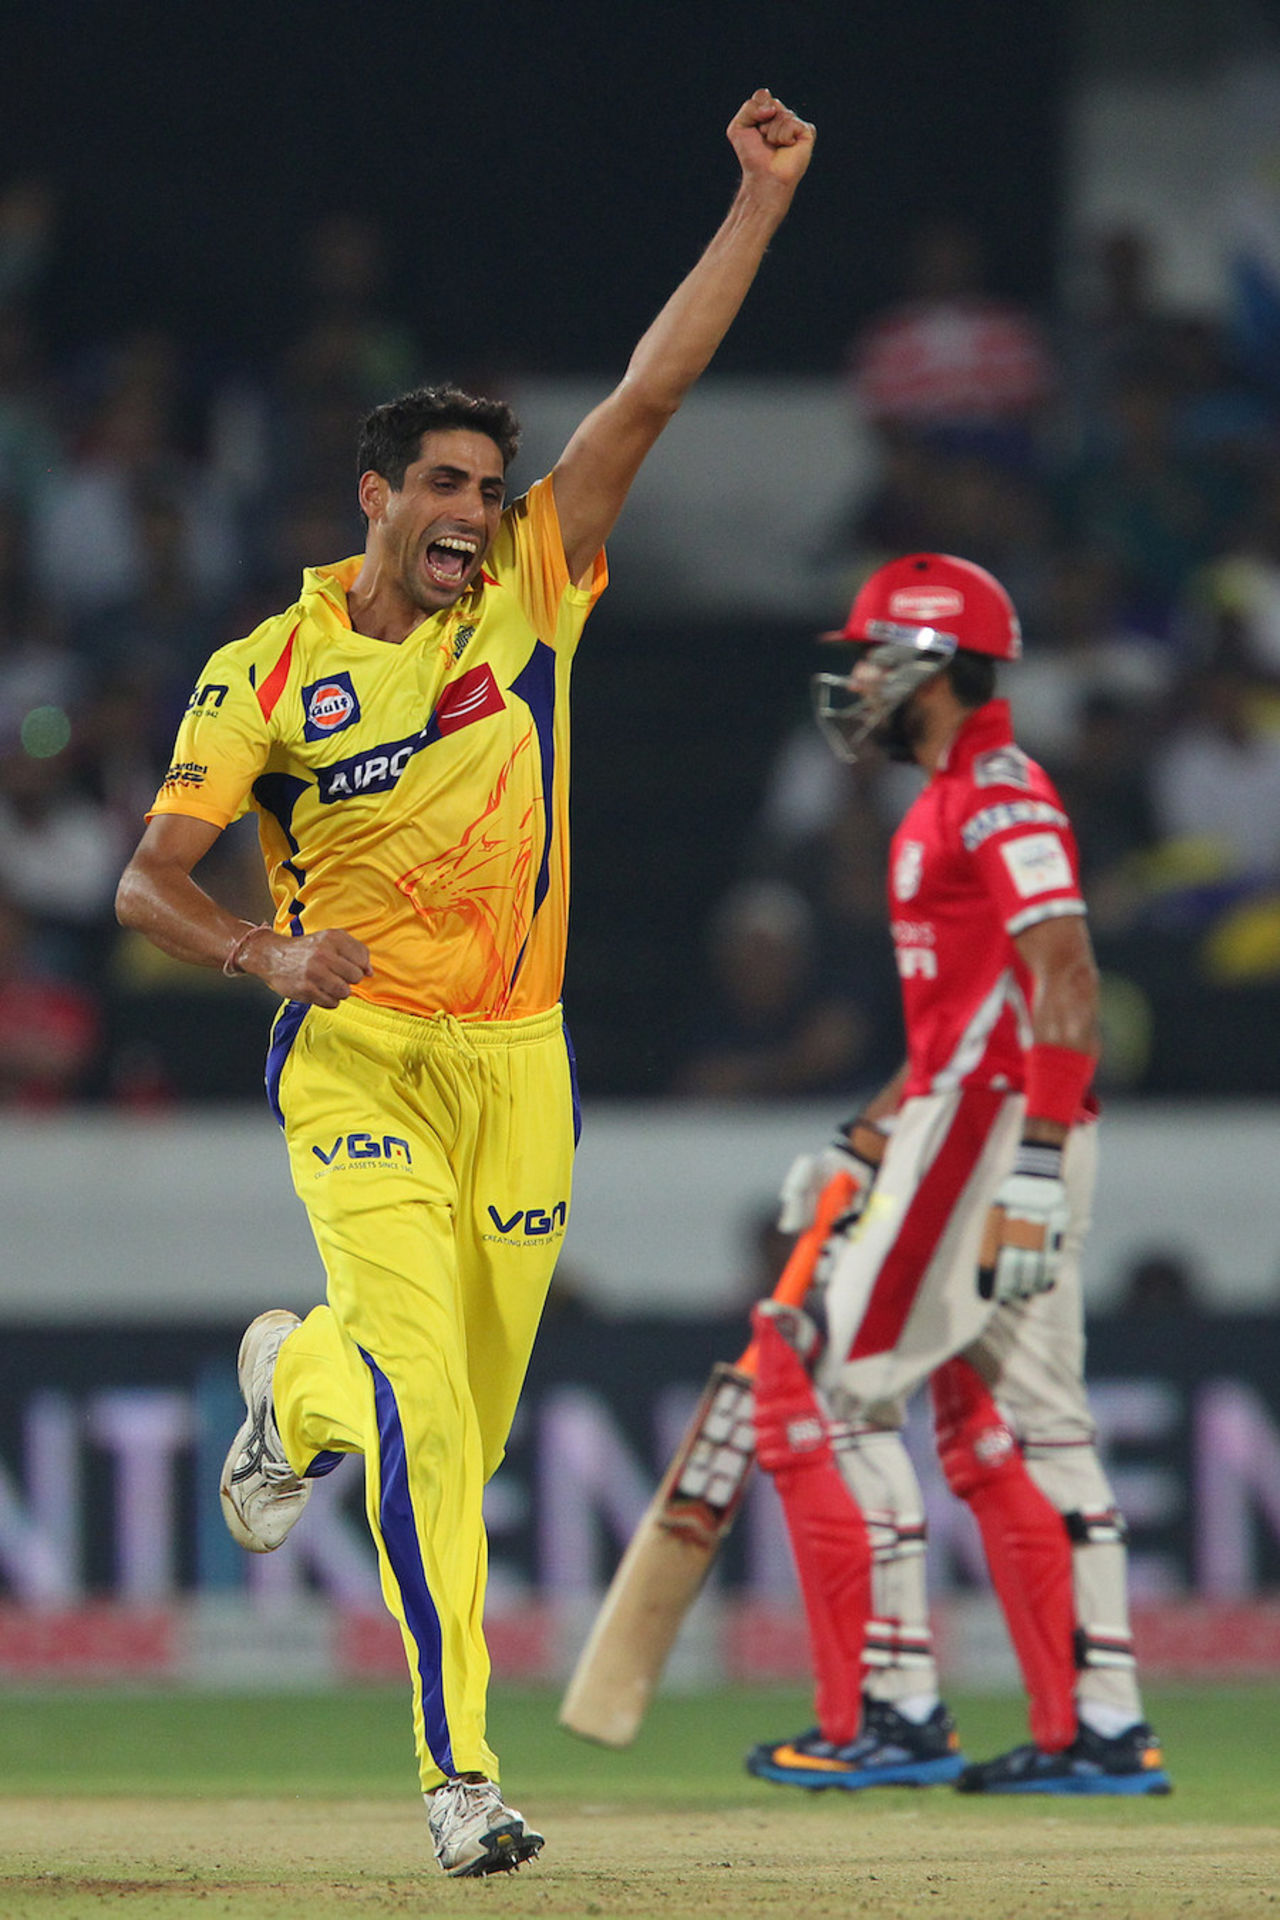 Ashish Nehra is pumped after taking a wicket, Kings XI Punjab v Chennai Super Kings, 2nd semi-final, CLT20, Hyderabad, October 2, 2014